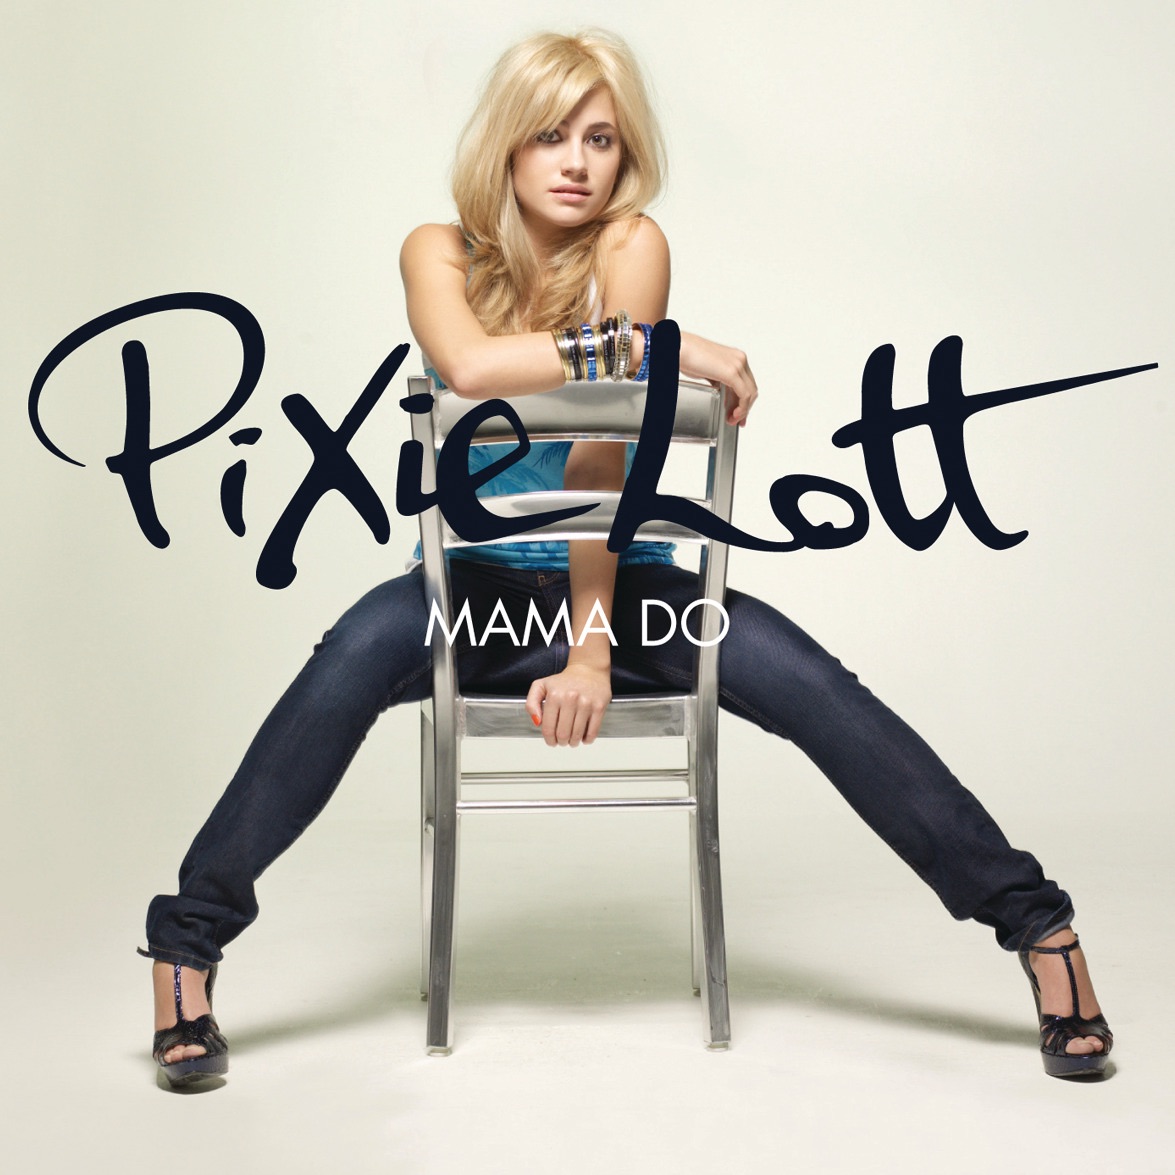 Pixie Lott Mama Do (Uh Oh, Uh Oh) cover artwork